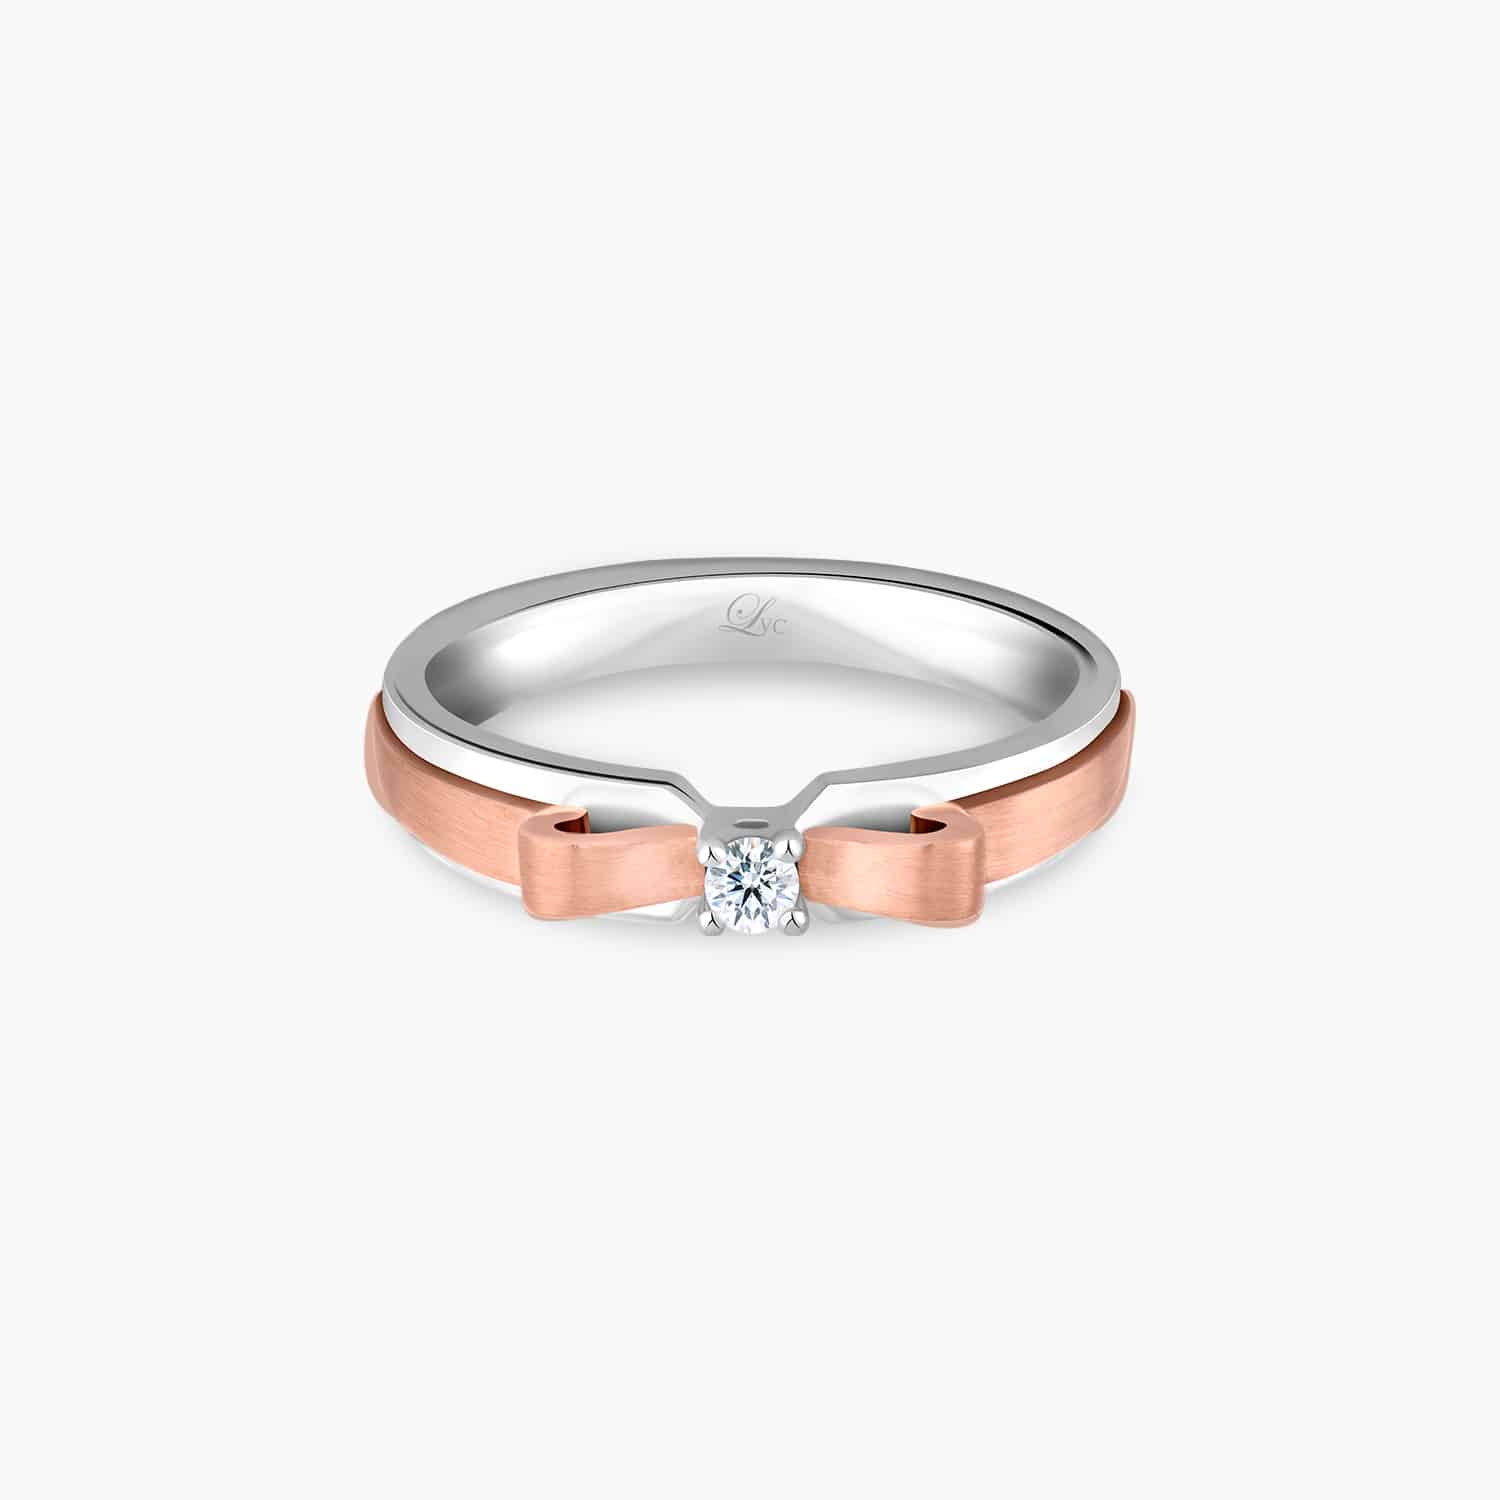 LVC NOEUD CHERRY WEDDING BAND IN ROSE GOLD WITH DIAMONDS a wedding band for women in 18k white and rose gold with 1 diamond 钻石 戒指 cincin diamond